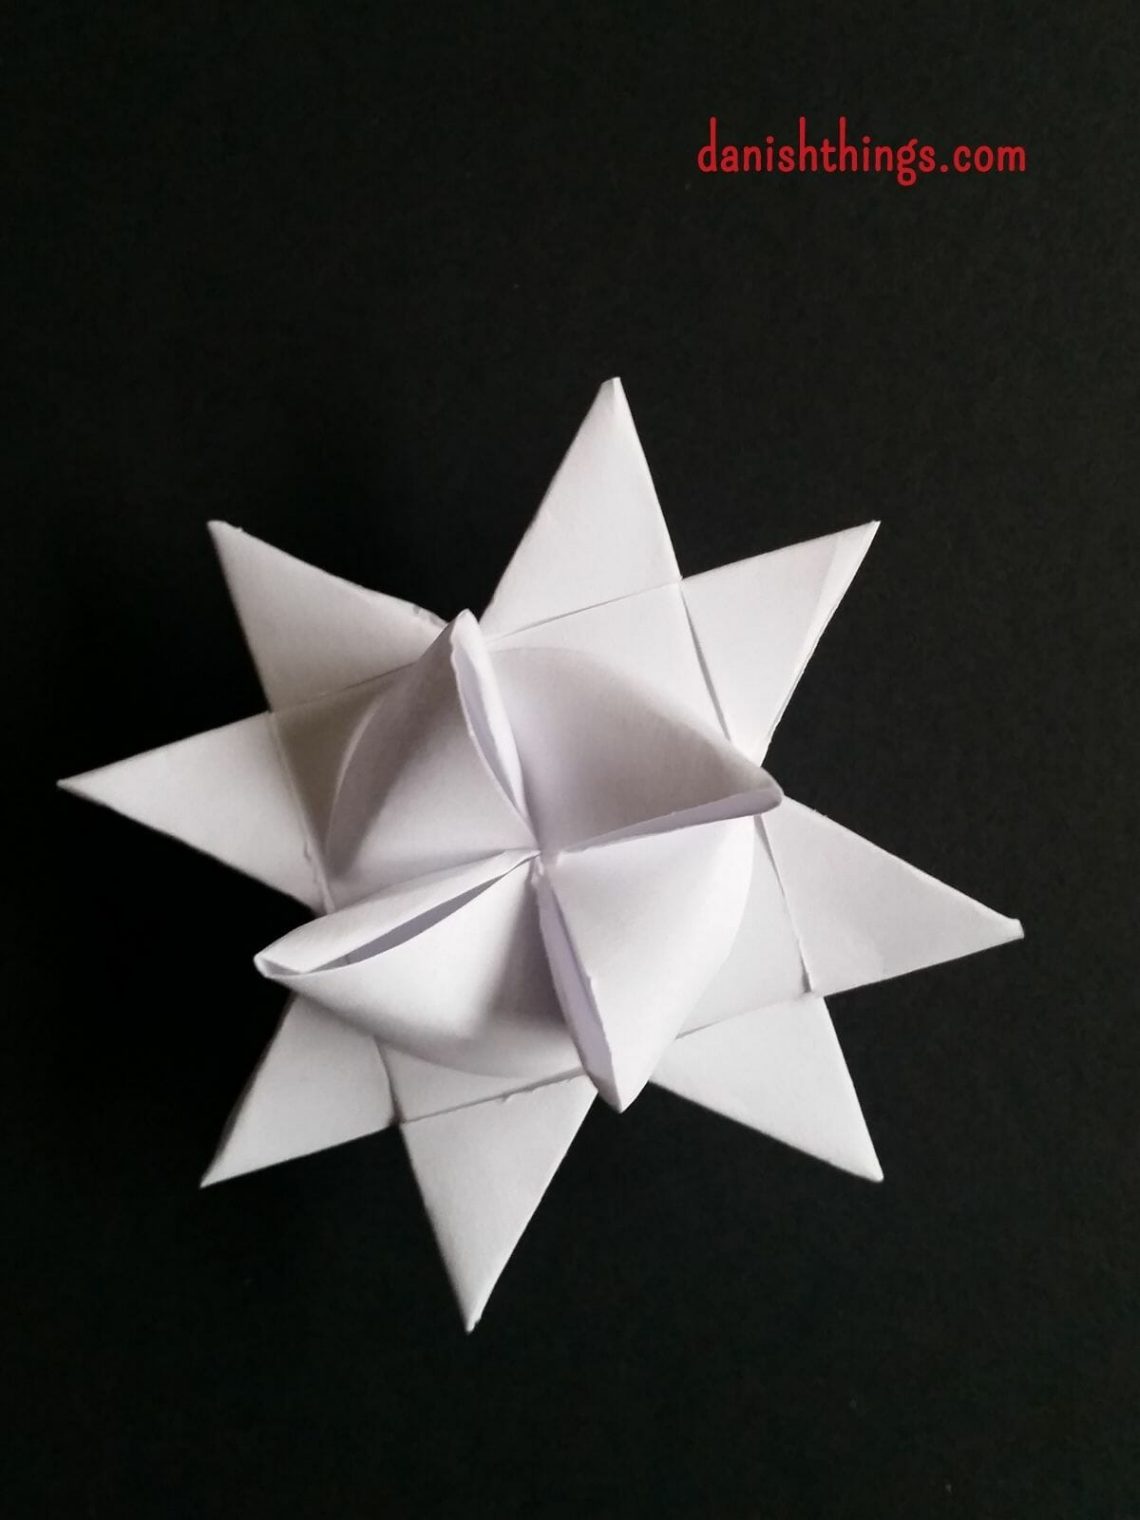 How to make a Froebel star - a classic Danish Christmas decoration. A Christmas star - step-by-step guide. Whether you weave or fold paper stars, if you are a beginner or experienced, you will get help with text, photos, and videos for every step. Find recipes, step-by-step guides, free print, and inspiration for this time of year at danishthings.com © Christel Parby - Danish Things #DanishThings #froebelstar #frobelstern #paperstar #paper #star #howto #howtoguide #danish #christmas #decoration #homemade #decoration #danishchristmas #danishstar #adventstar #advent #nordic #german #christmasstar